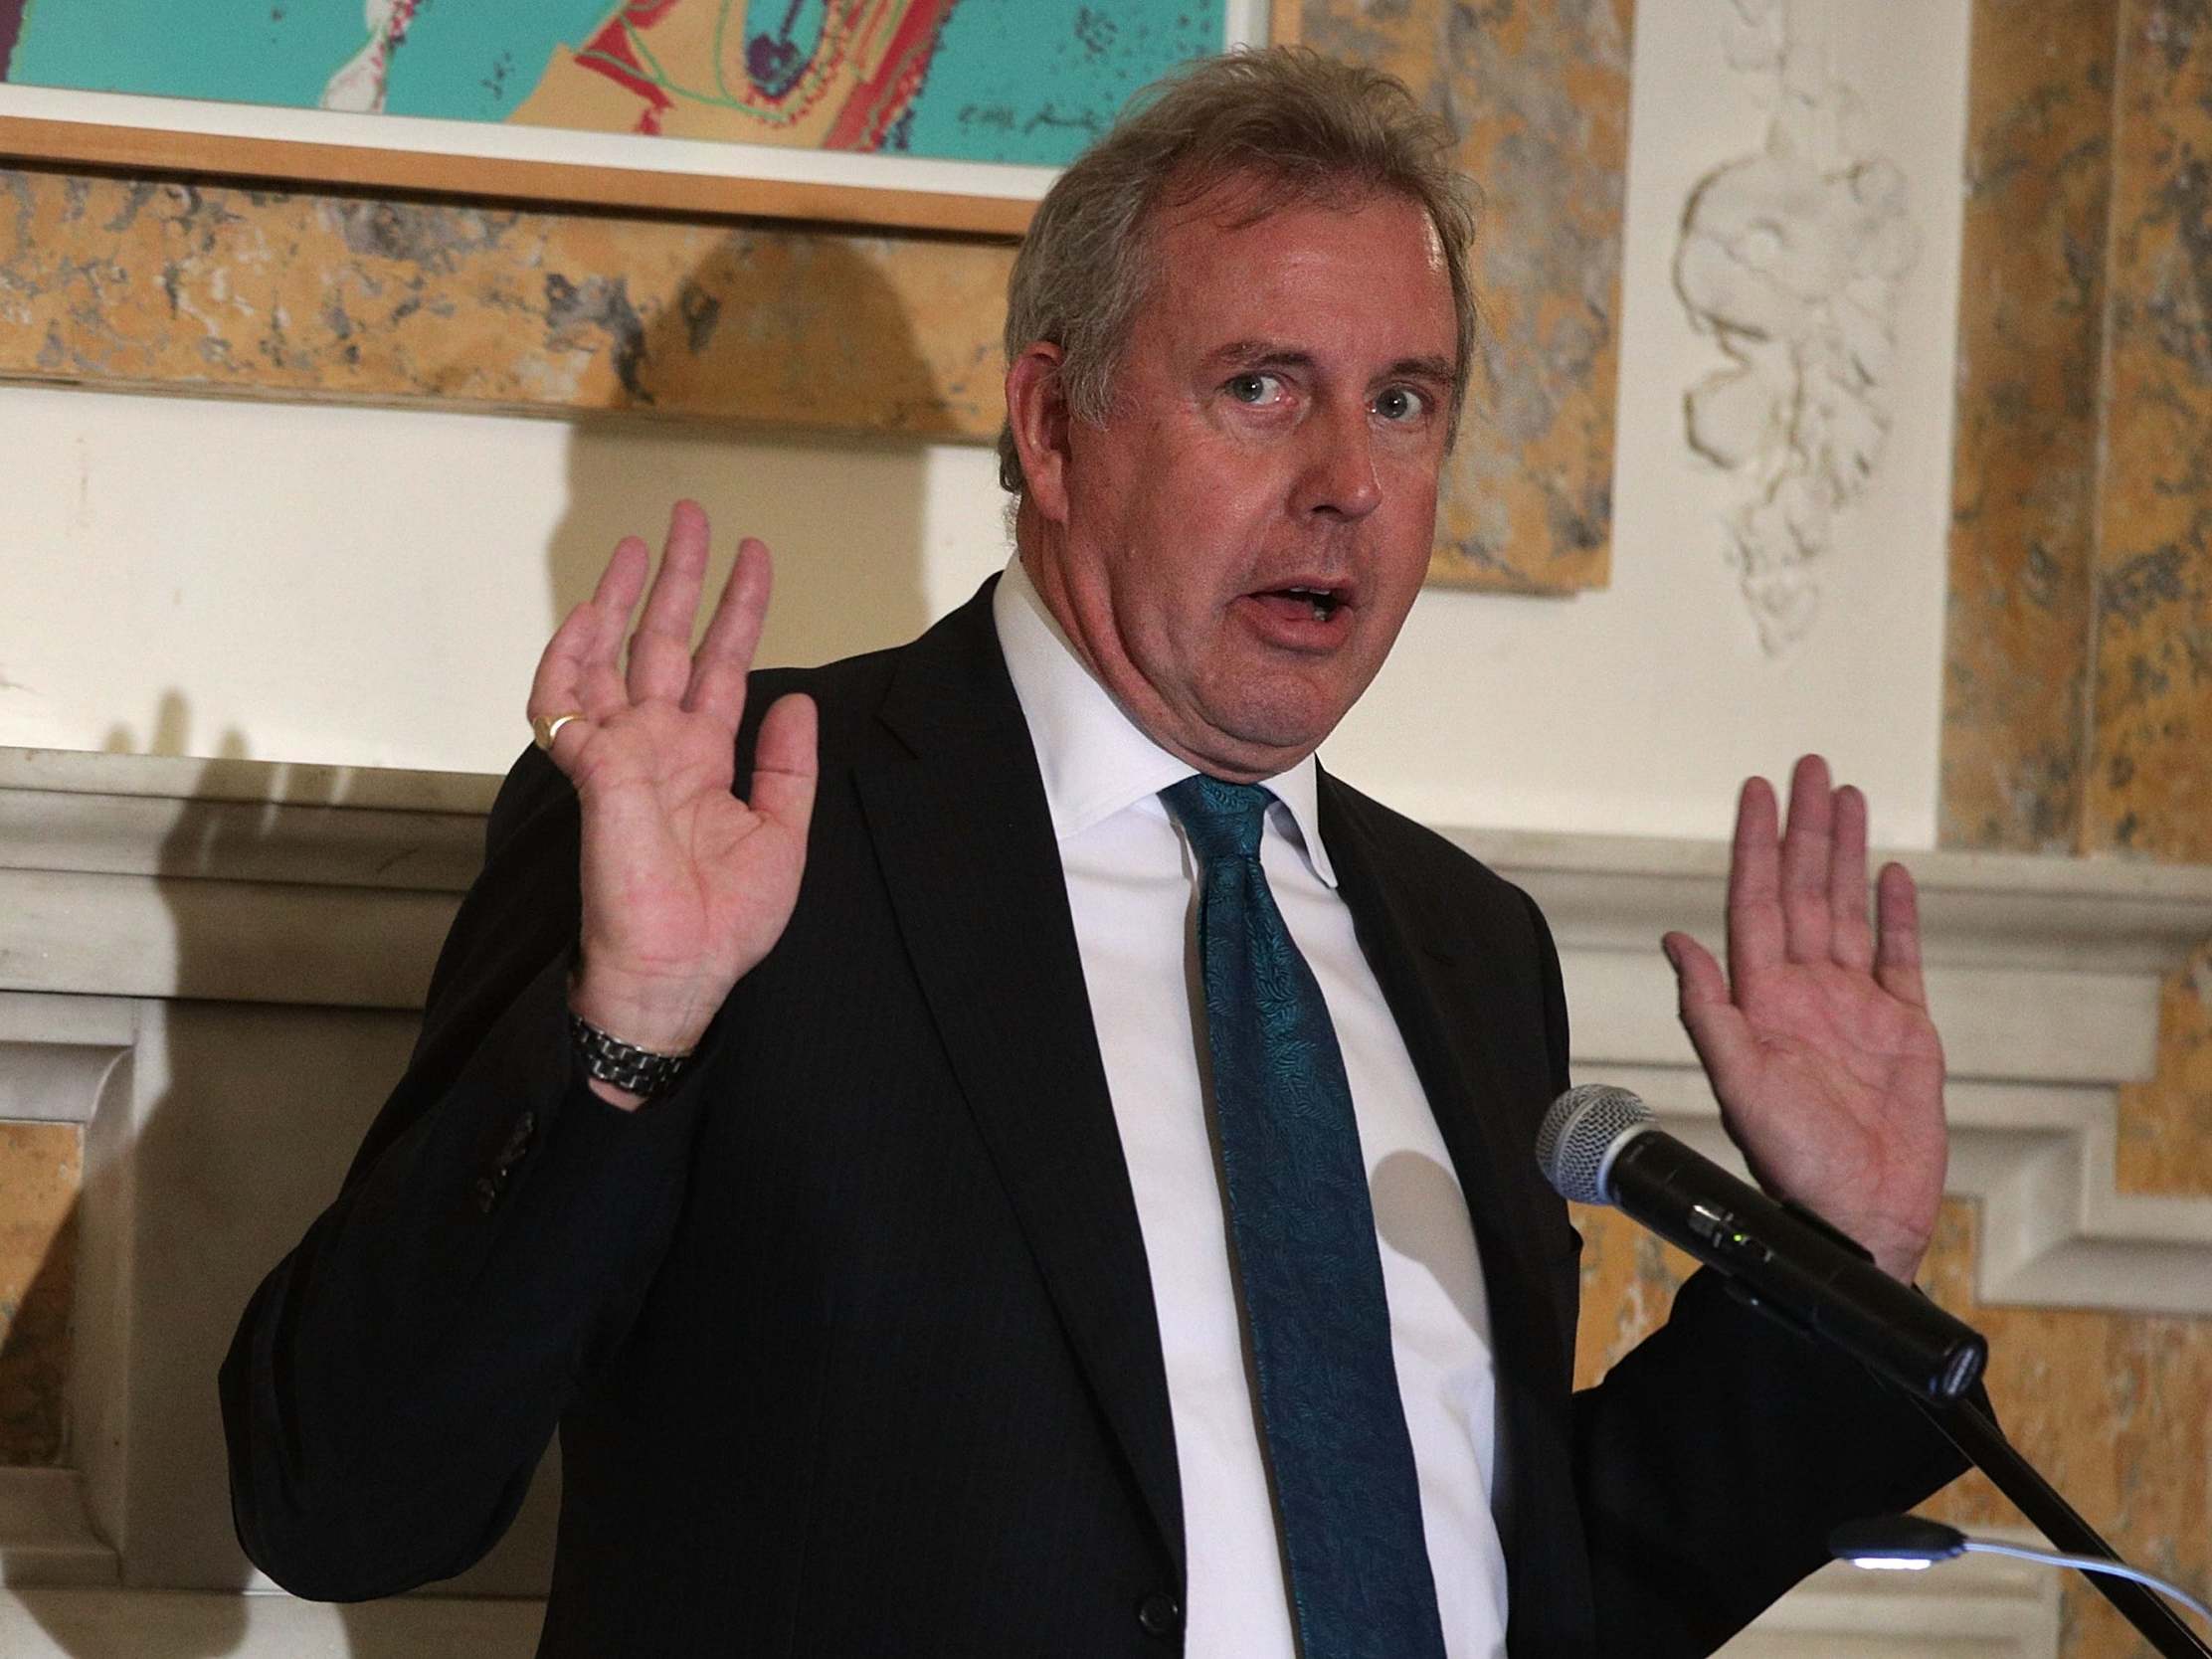 Sir Kim Darroch, who resigned amid a row regarding leaked emails which criticised the Trump administration